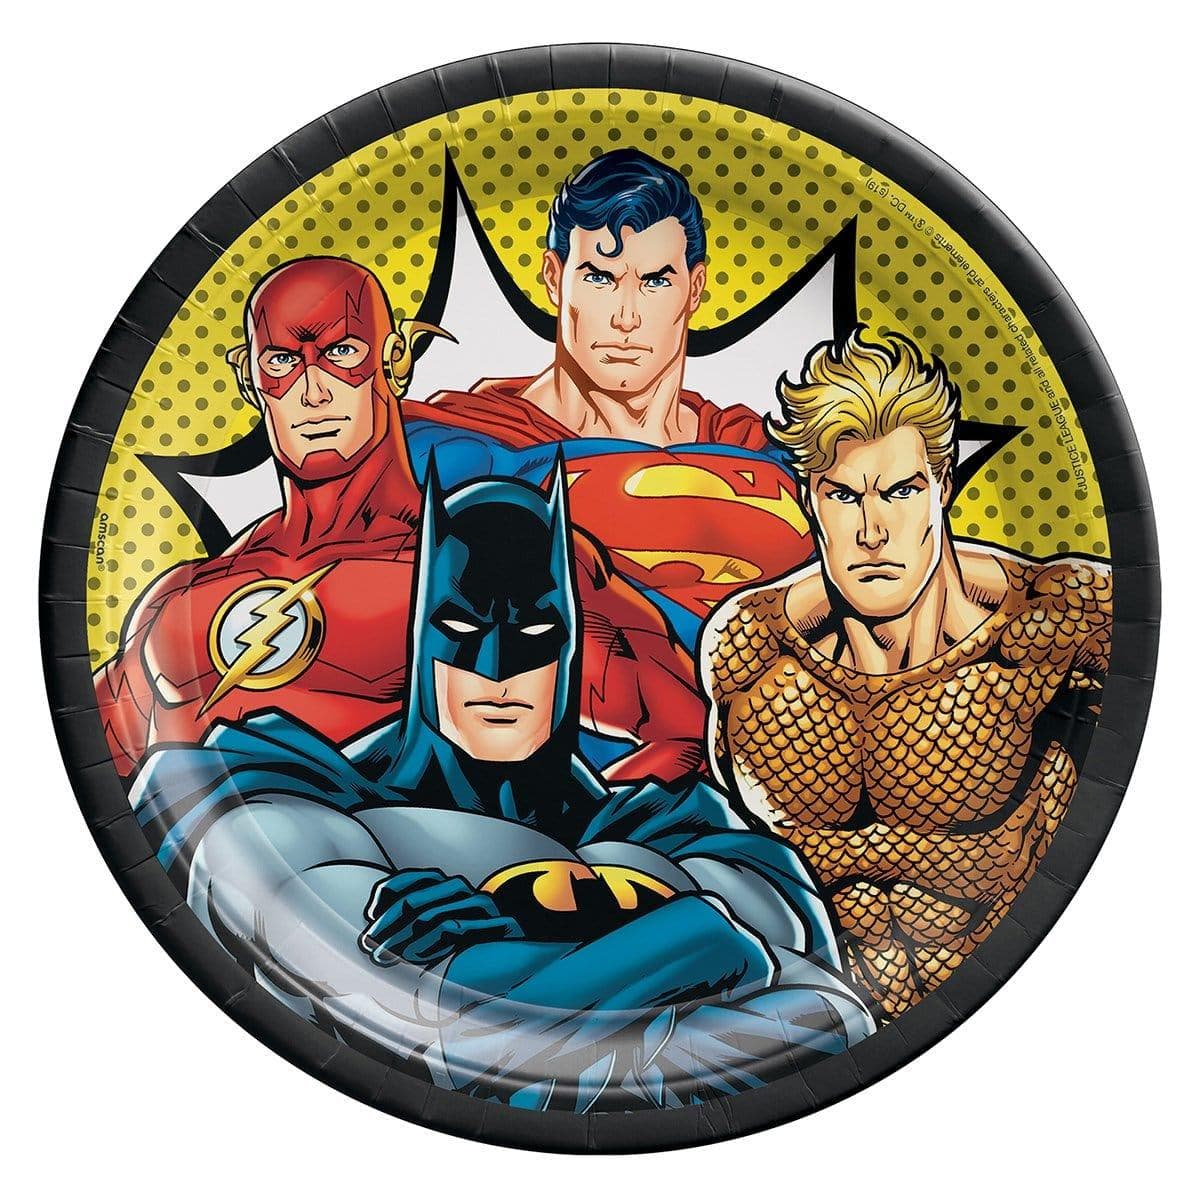 Buy Kids Birthday Justice League Dinner Plates 9 inches, 8 per package sold at Party Expert